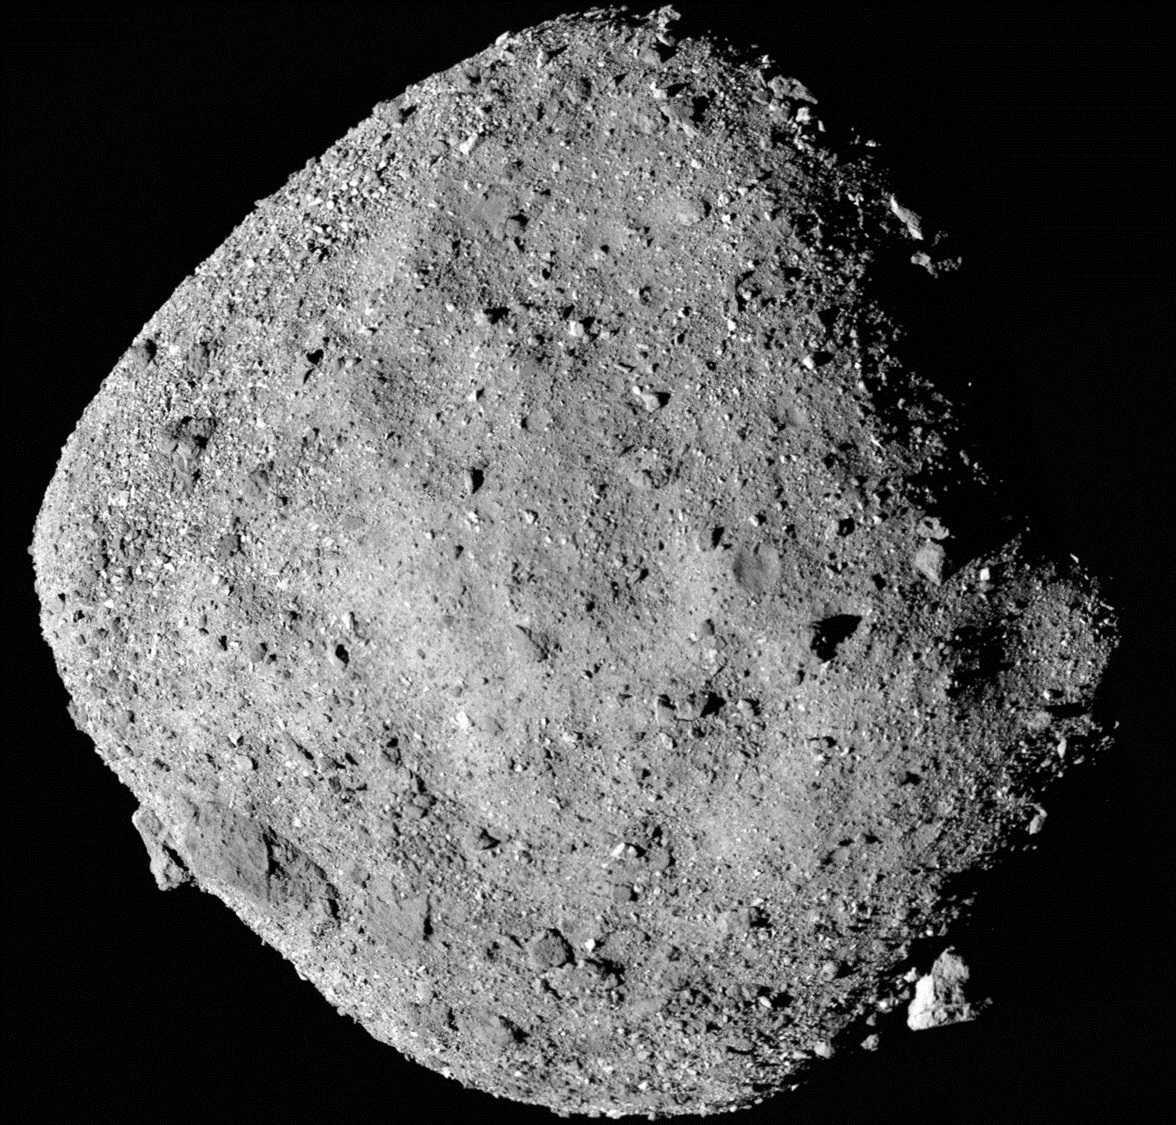 2023-09-22T224050Z_1868515923_RC2XD3A140EW_RTRMADP_3_SPACE-EXPLORATION-ASTEROID